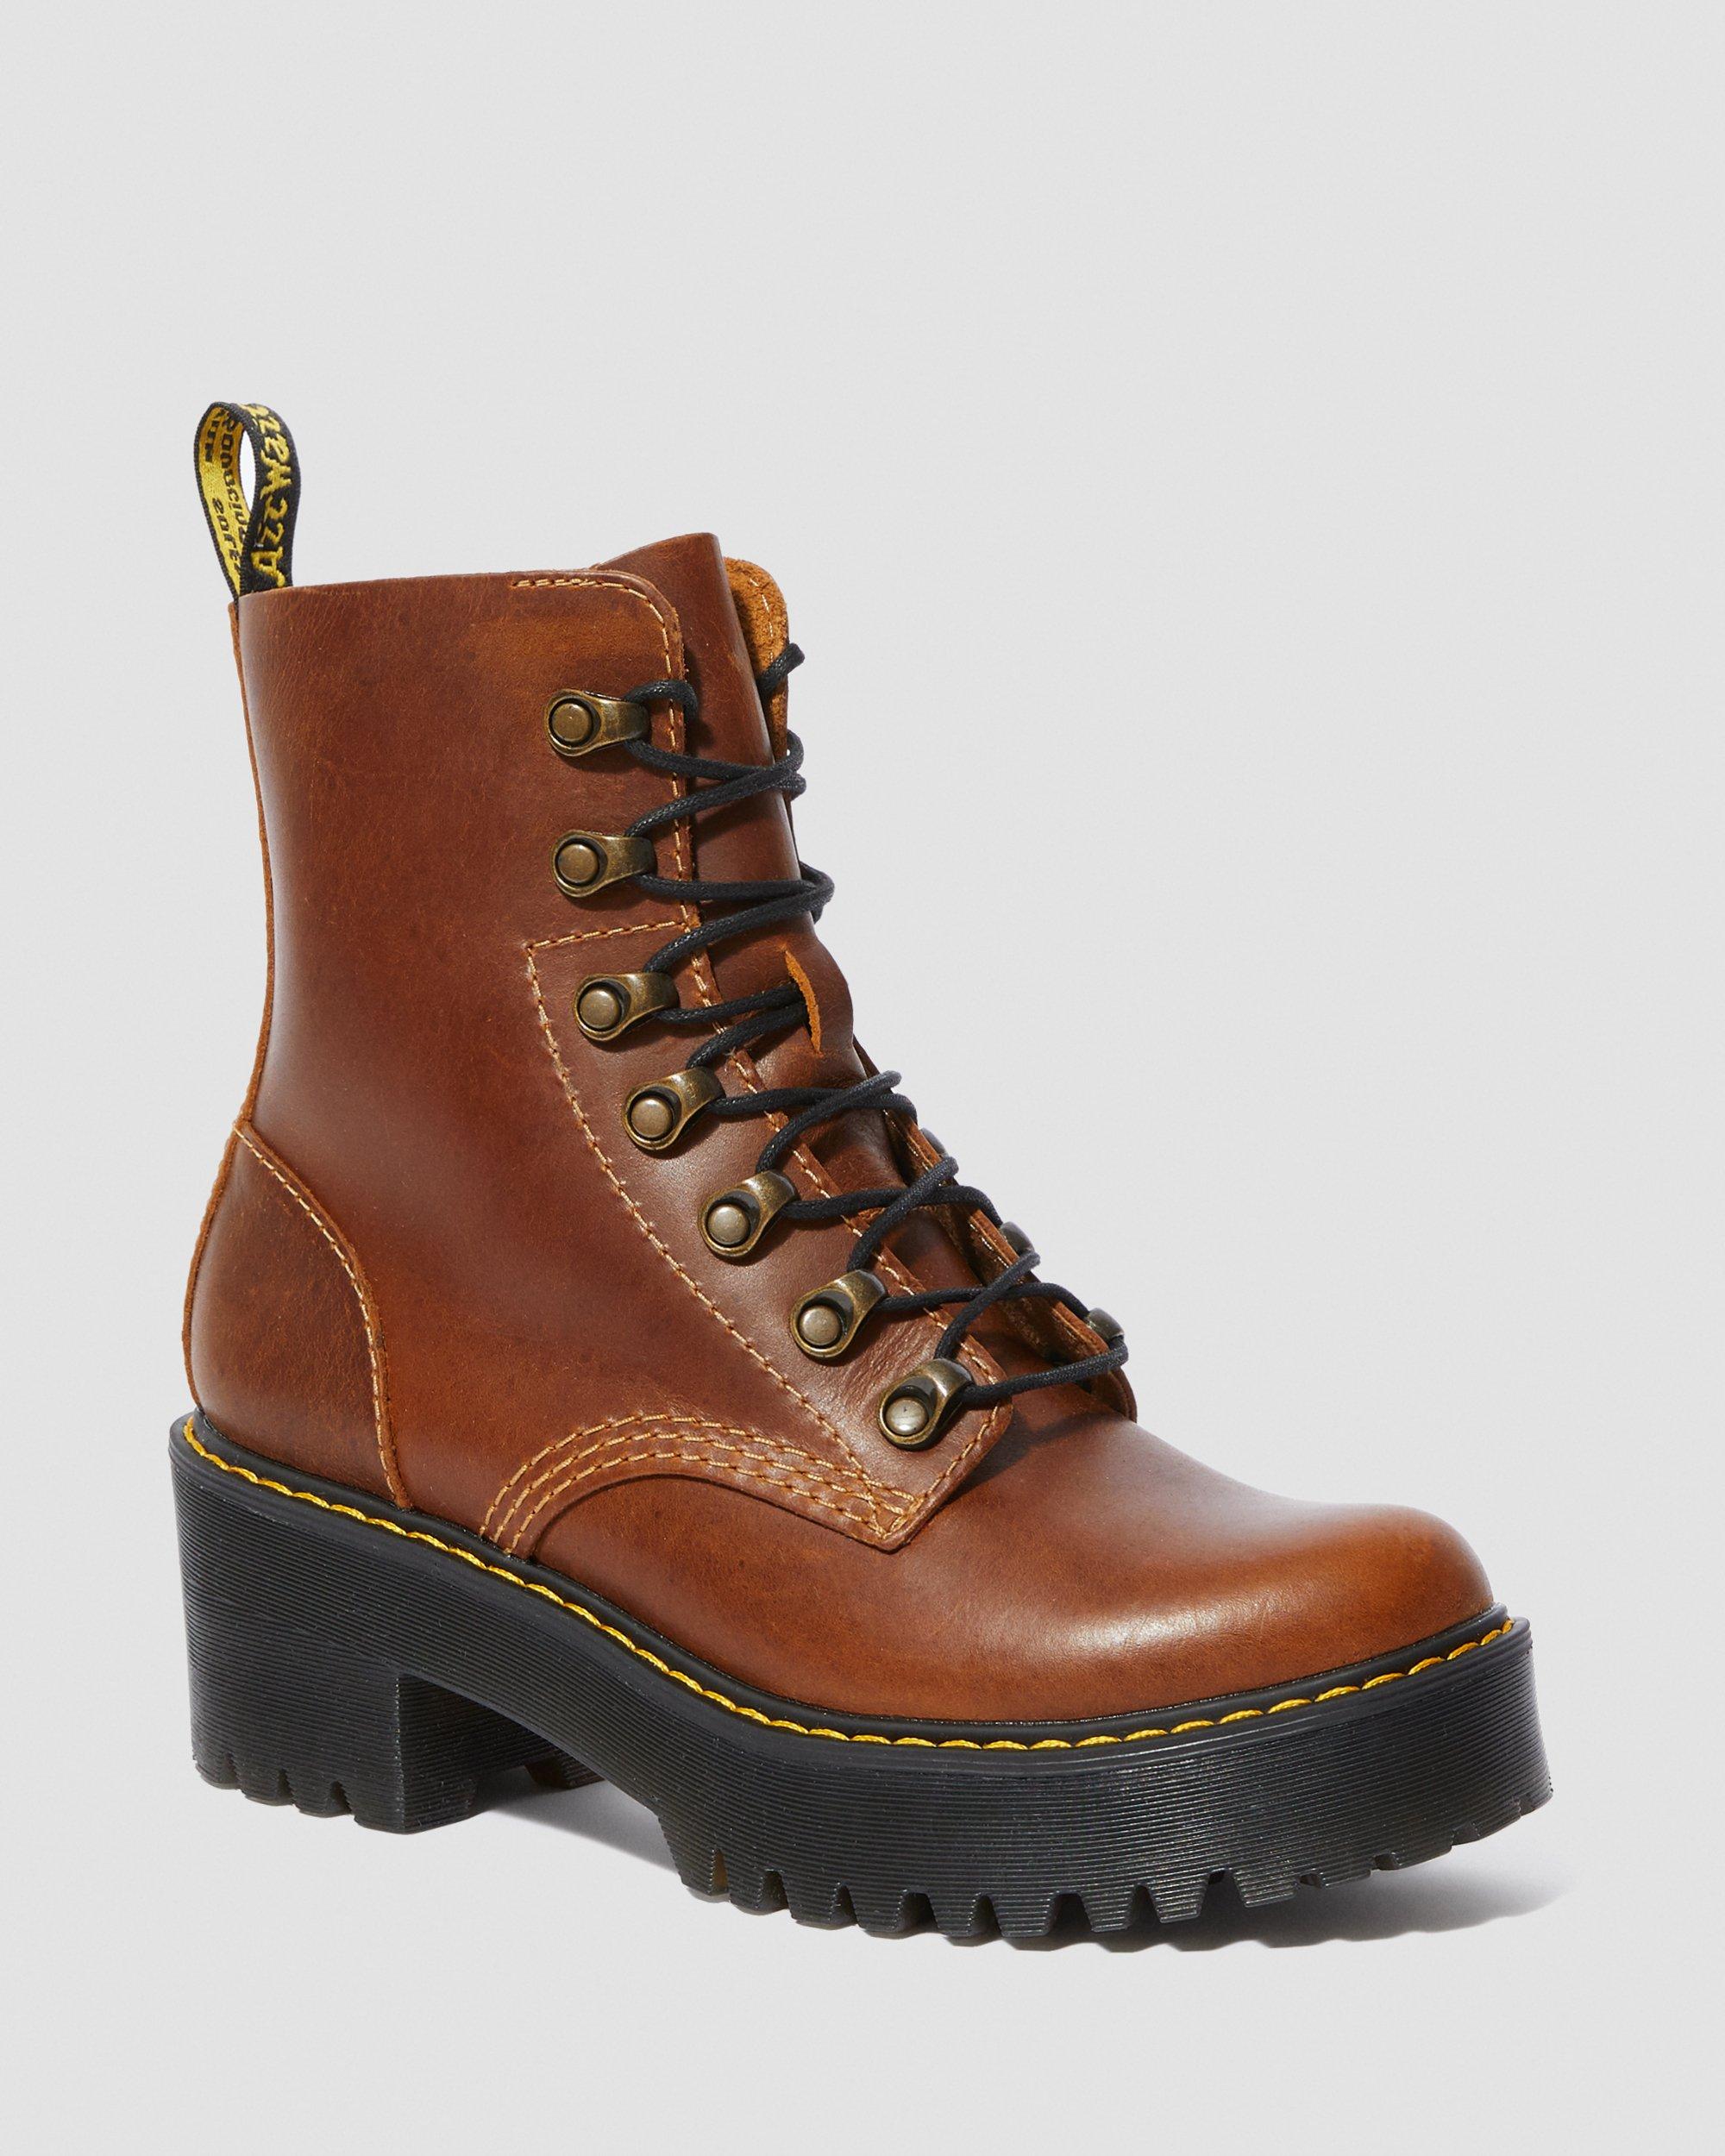 Leona Women's Orleans Leather Heeled Boots, Butterscotch | Dr. Martens